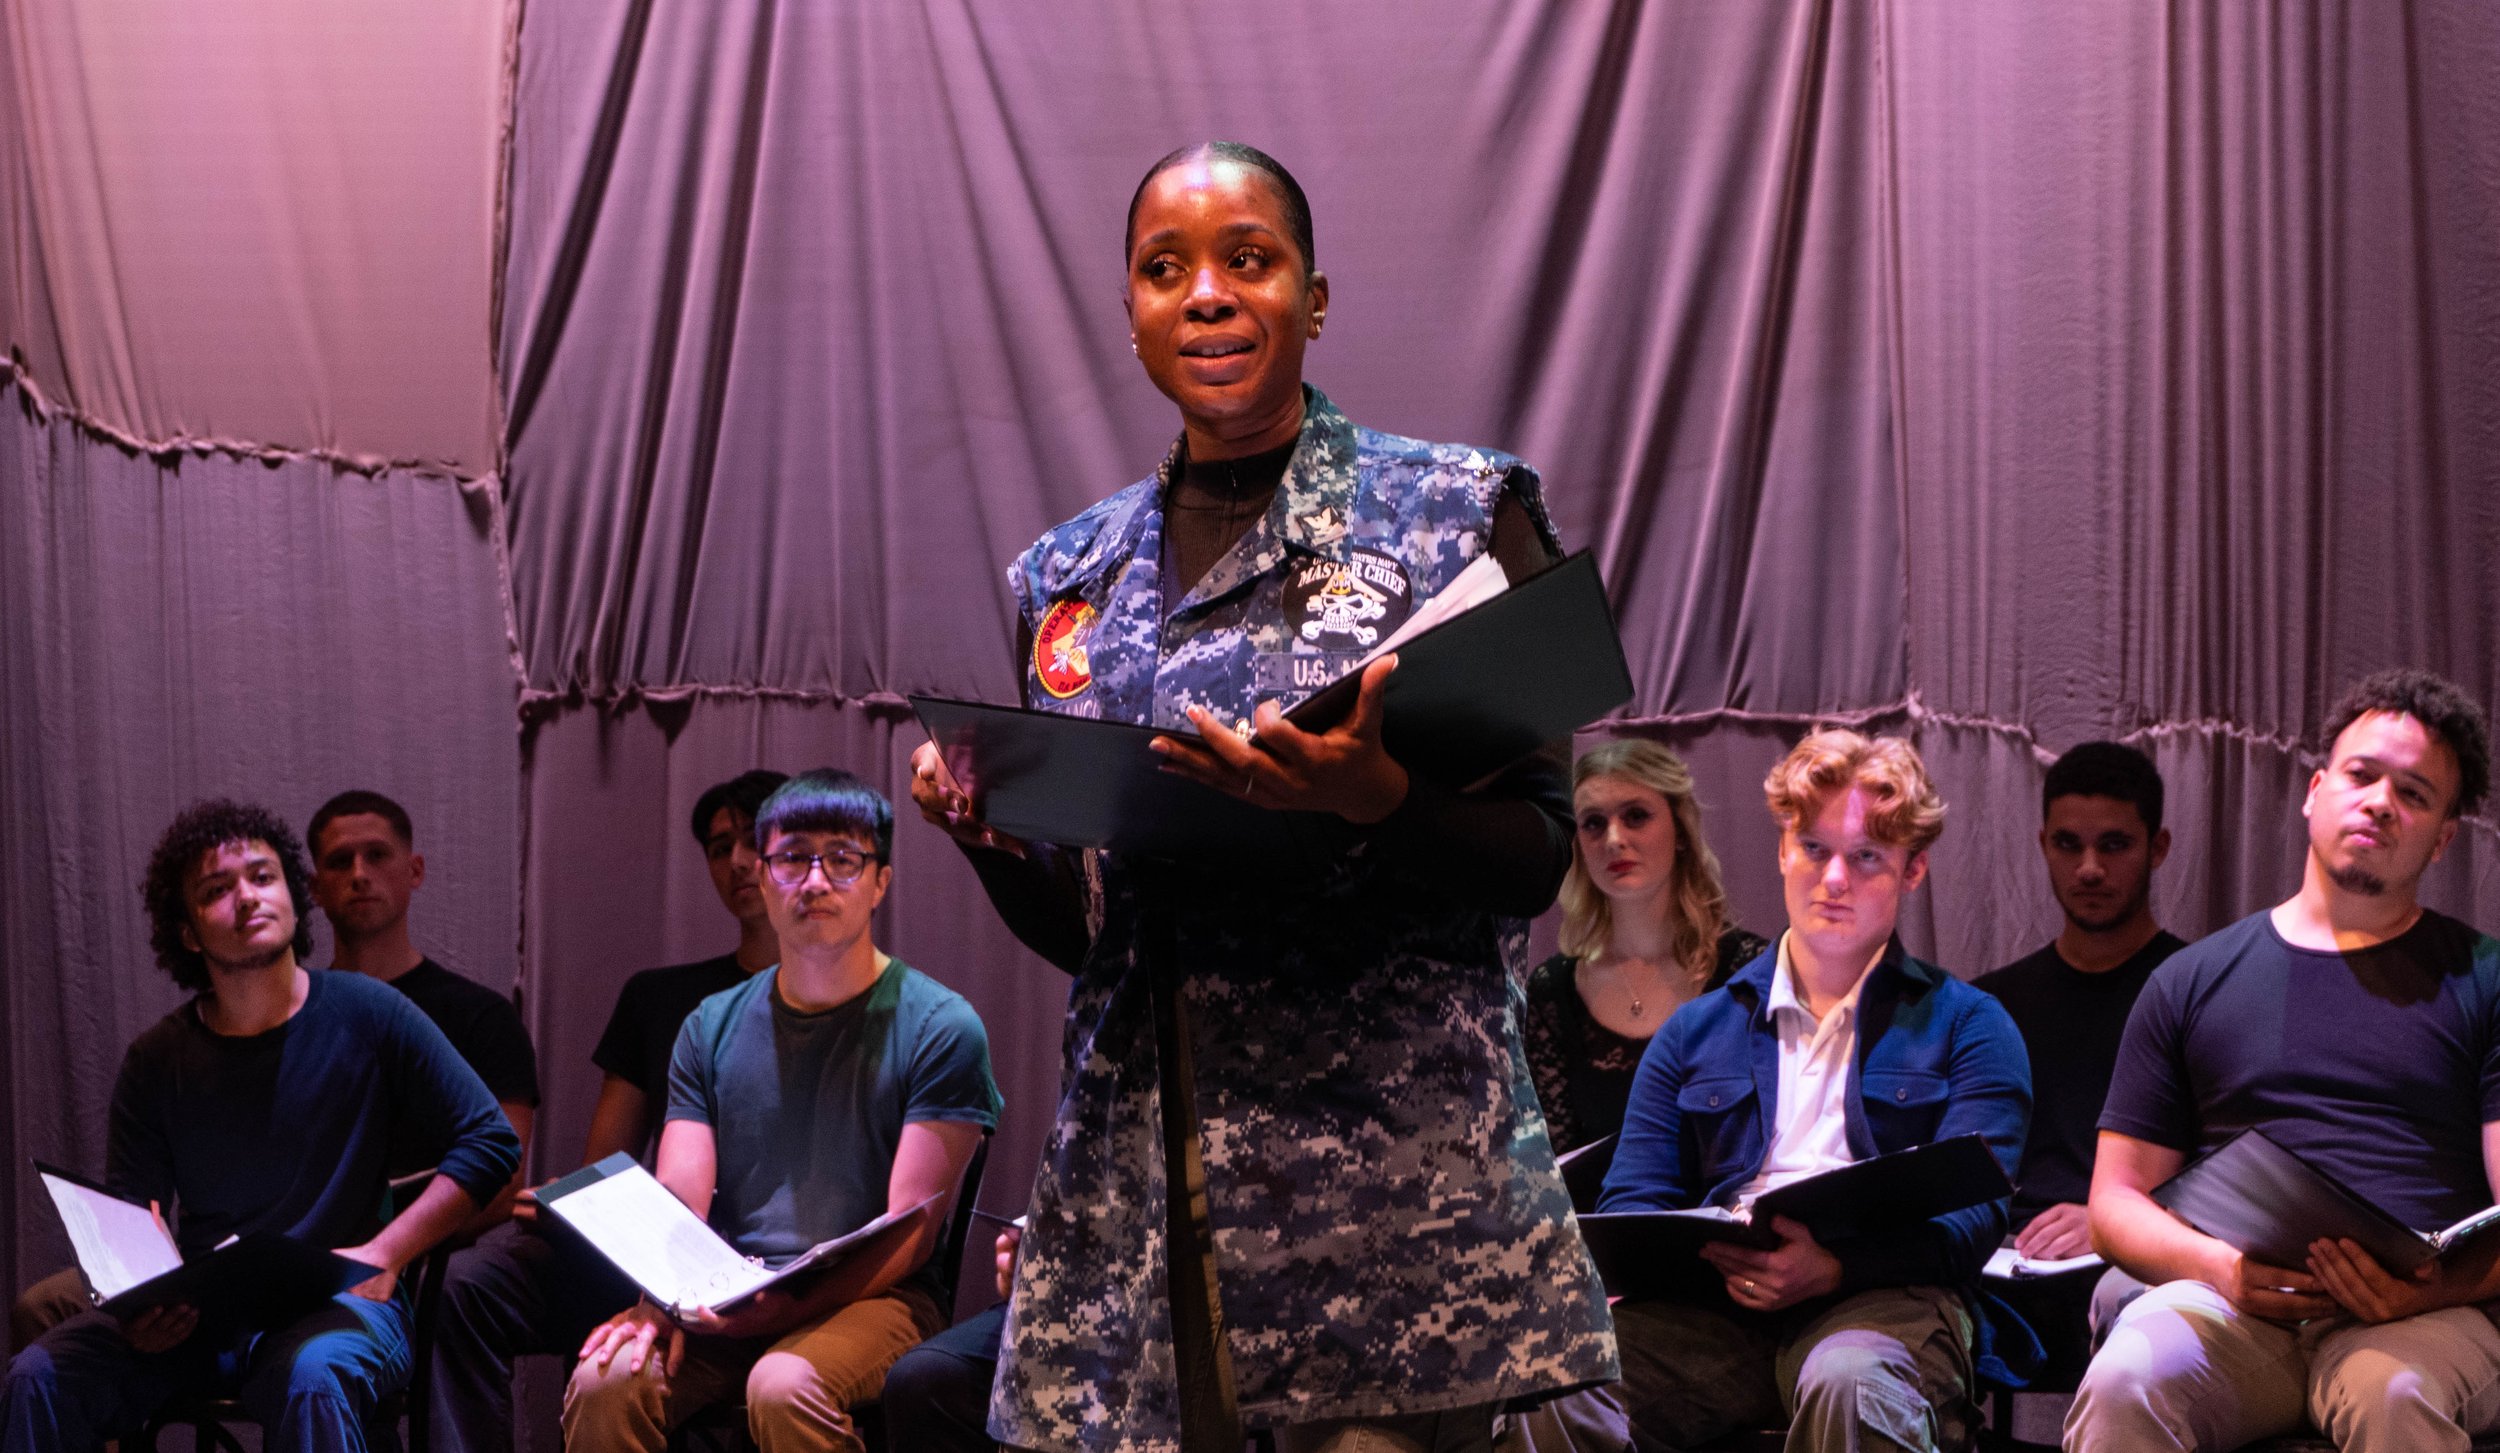  Jomarla Melancon plays Tiffany during the stage reading of War Words. War Words is a play written by Michelle Kholos Brooks and is part of a national initiative to honor veterans through theatrical storytelling. The play was in collaboration with Ne